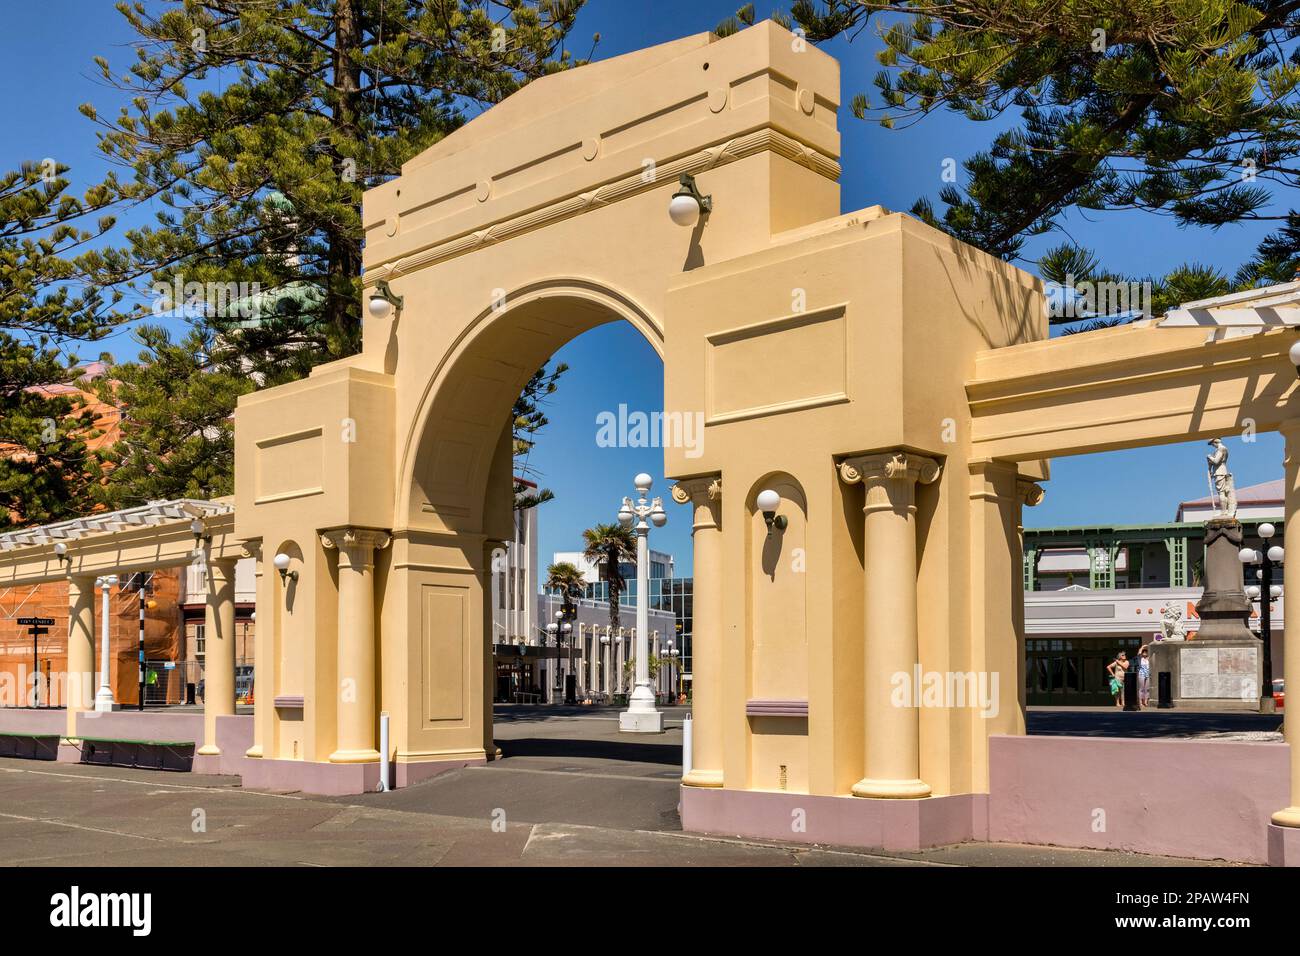 5 December 2022: Napier, Hawkes Bay, New Zealand - The Napier Arch on Marine Parade in Napier, New Zealand. Napier was largely rebuilt in Art Deco... Stock Photo